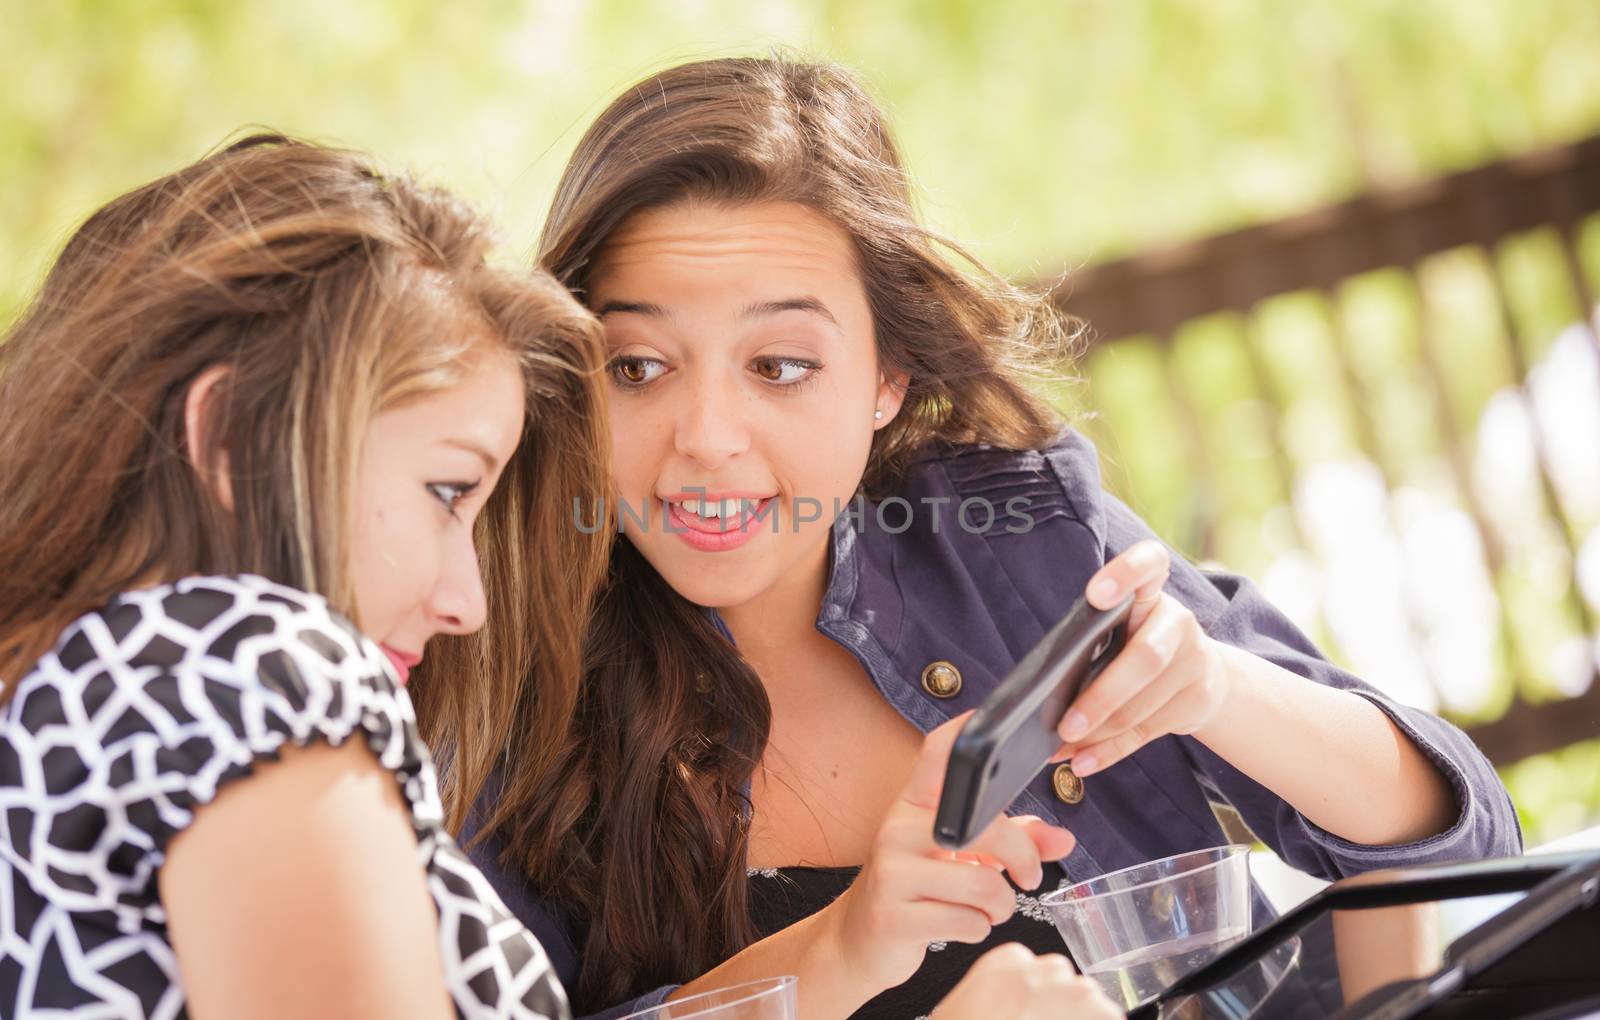 Expressive Young Adult Girlfriends Using Their Computer Electronics Outdoors